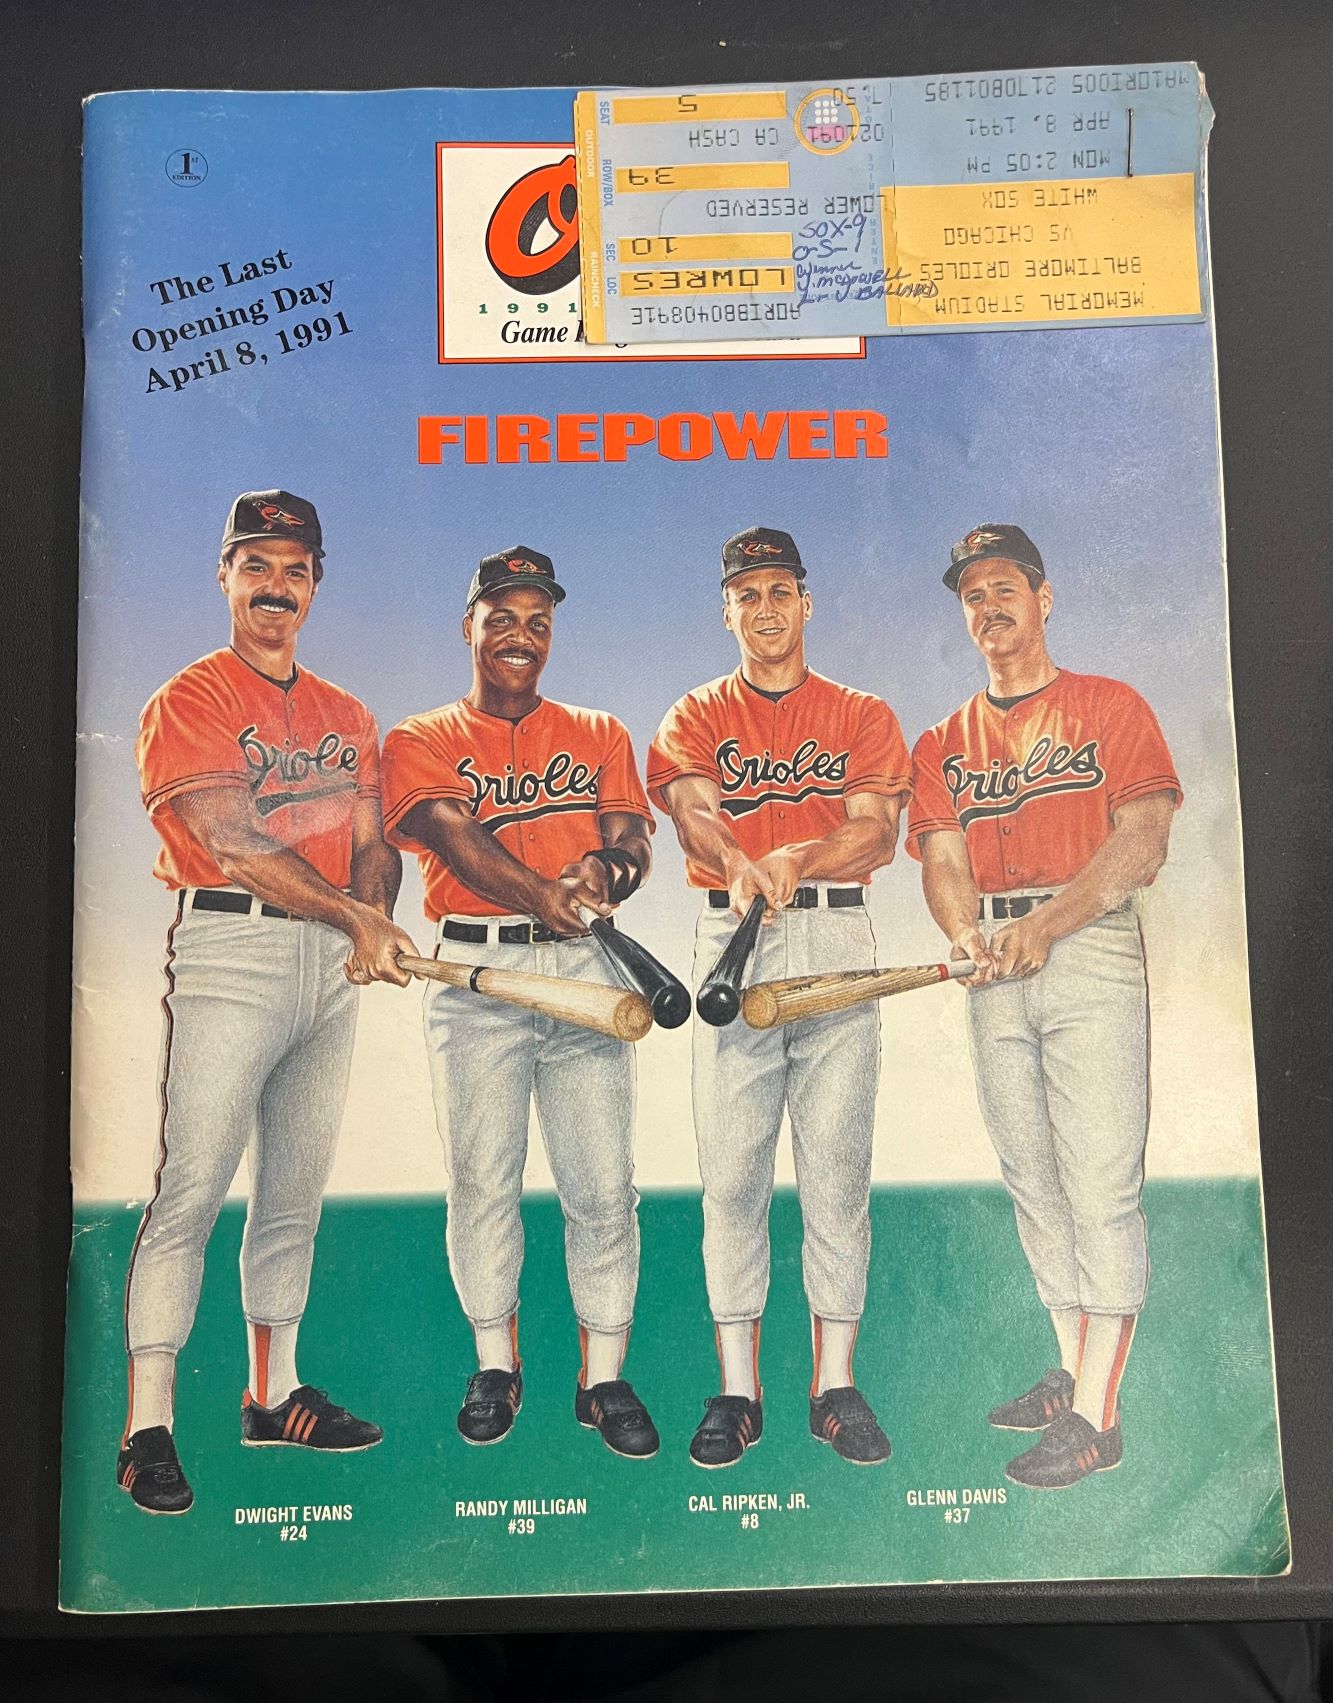 1971 Baltimore Orioles Opening Day Program With Ticket Stub